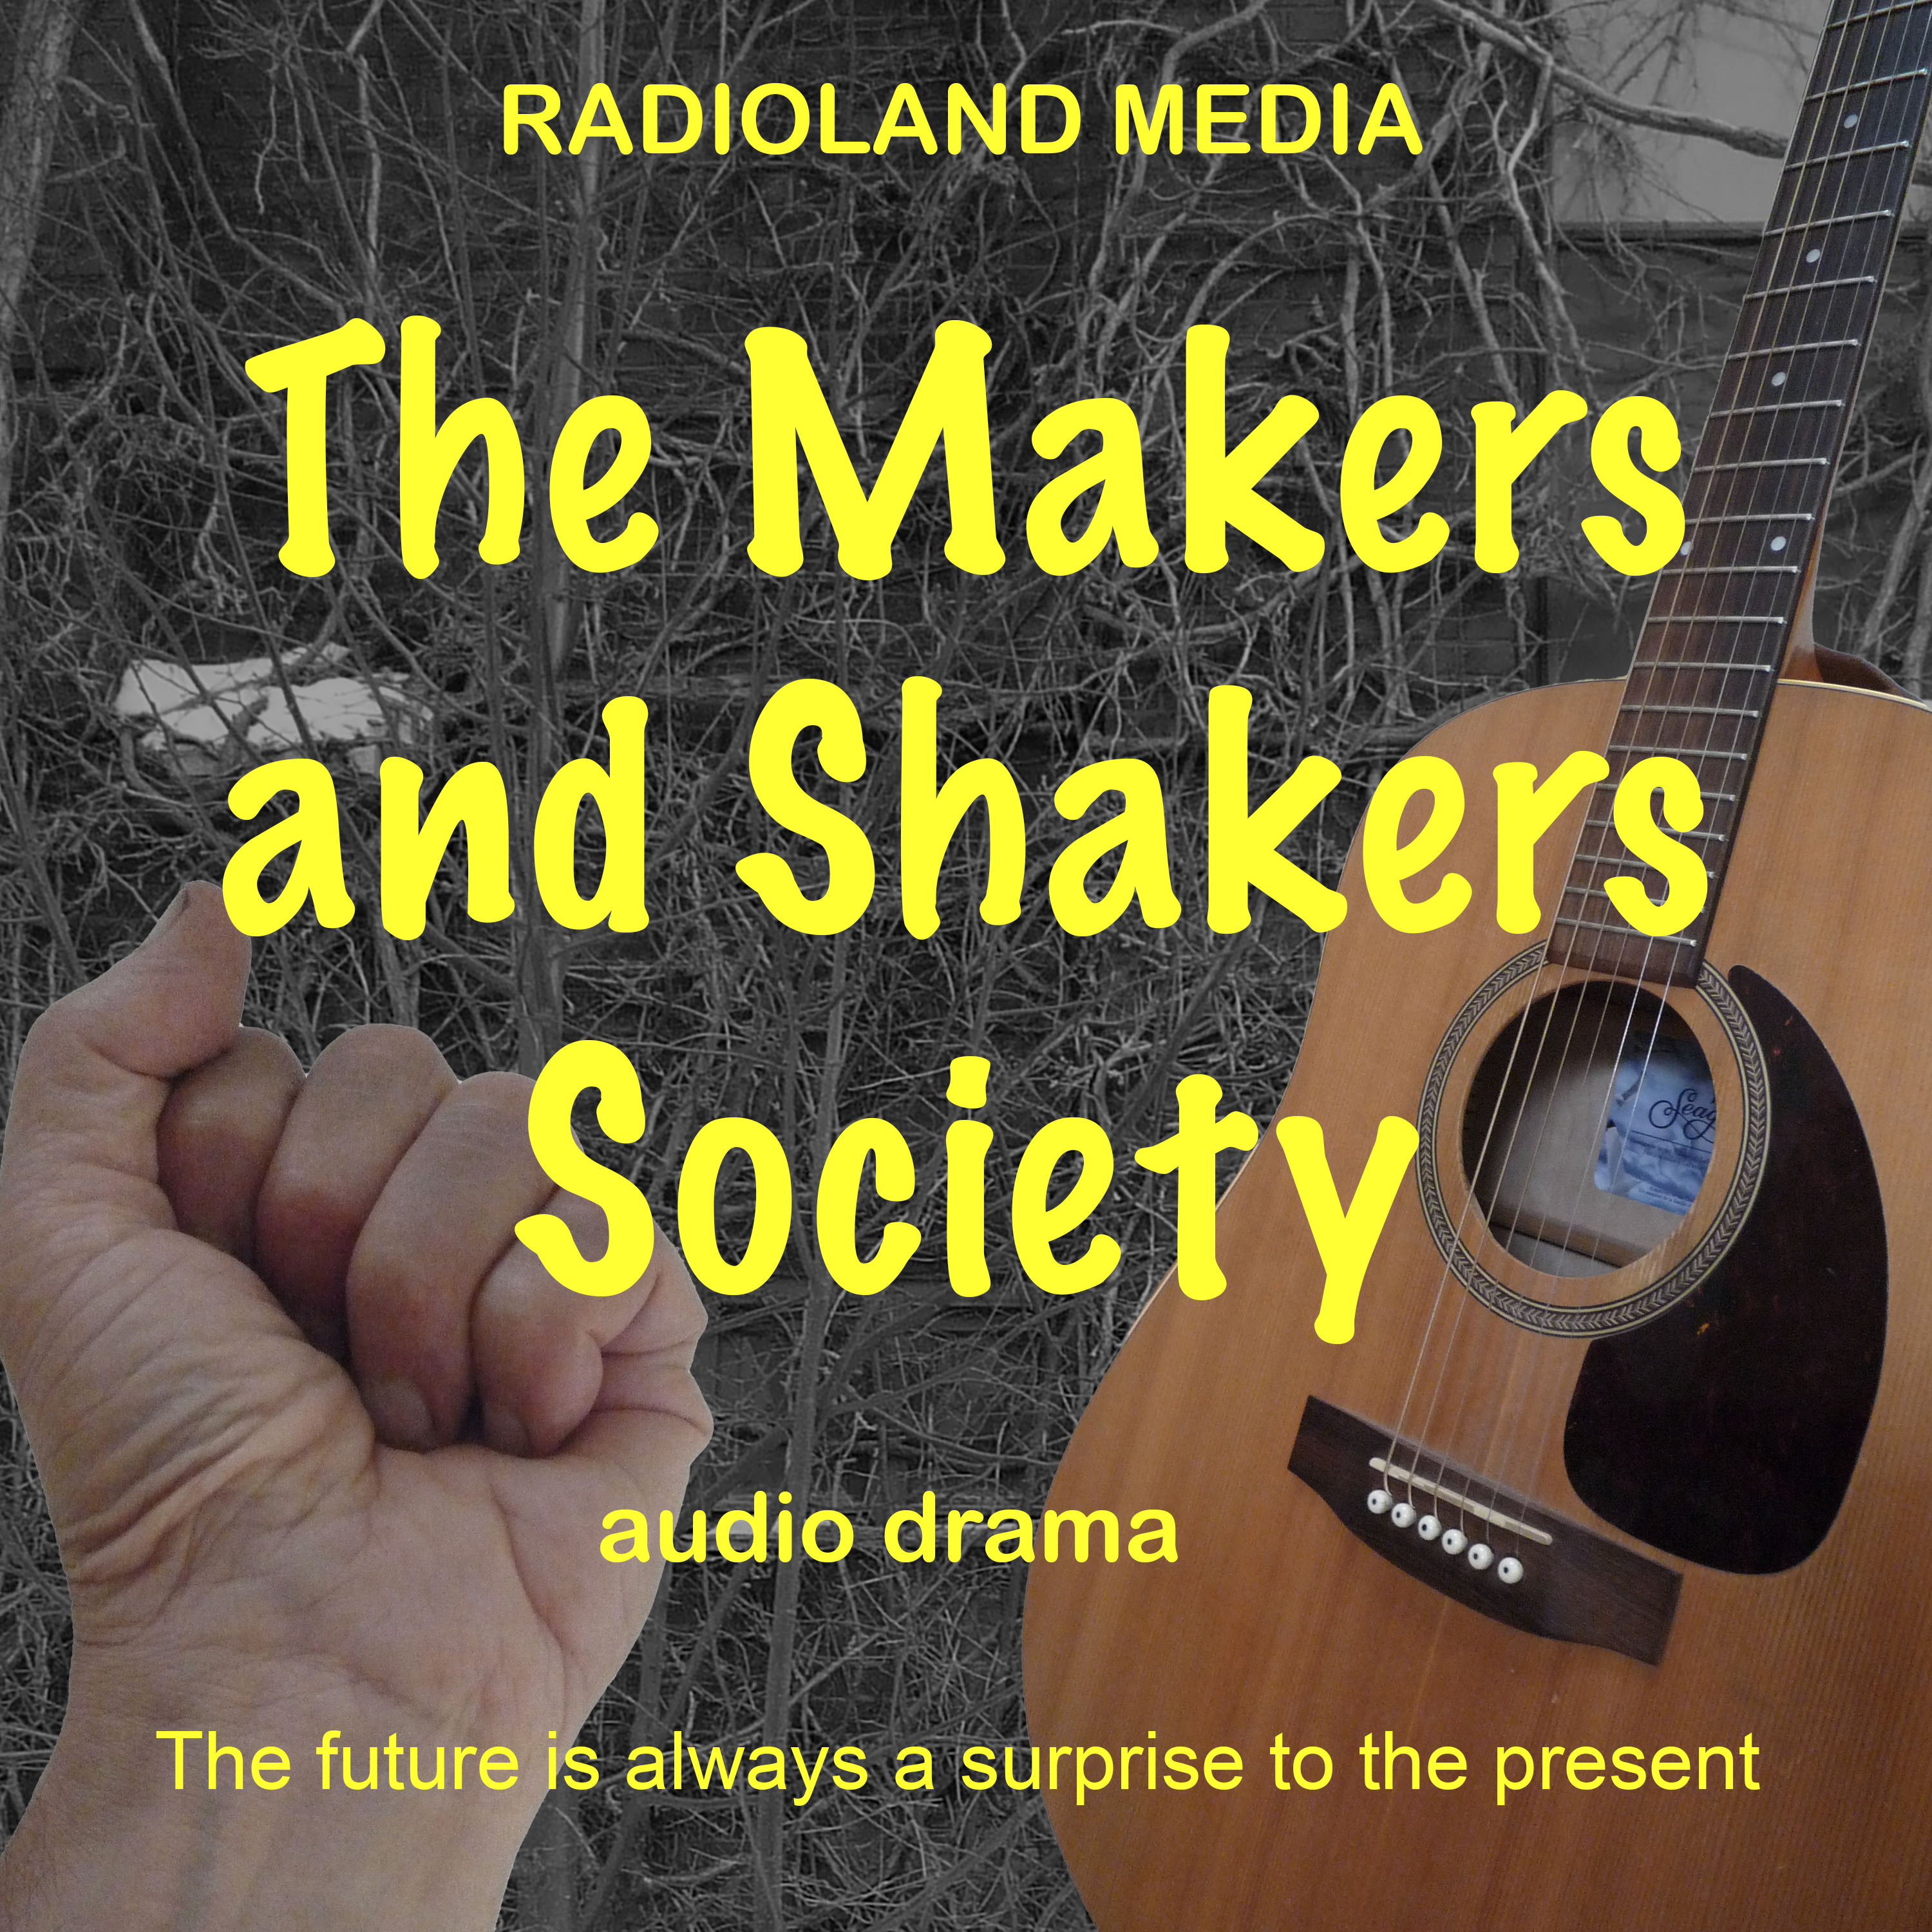 The Makers and Shakers Society - CFRC Podcast Network